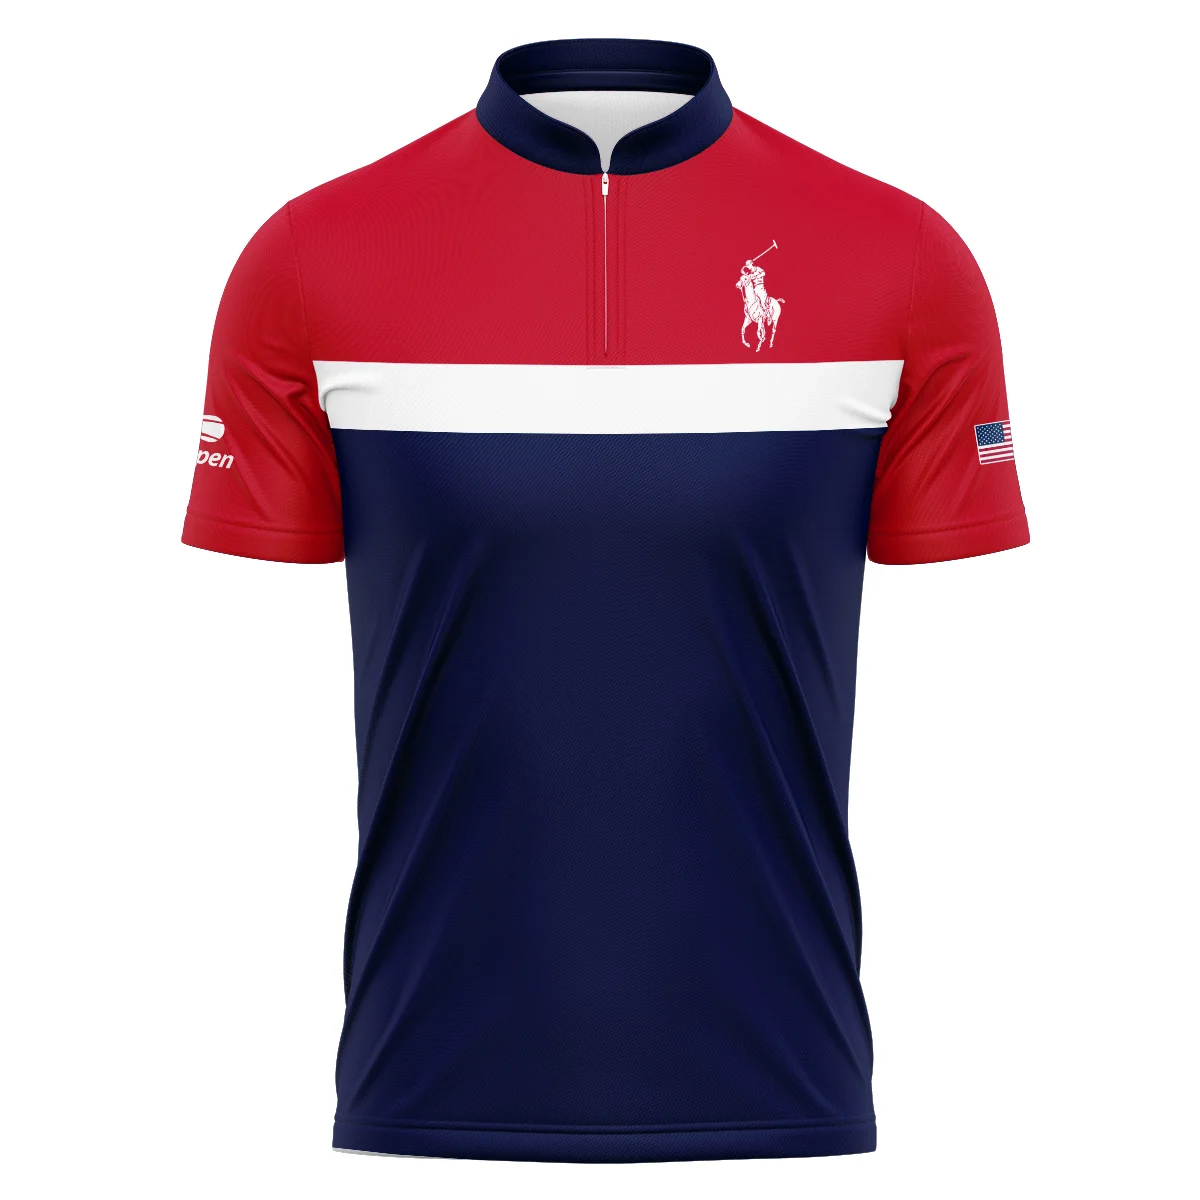 Ralph Lauren Blue Red White Background US Open Tennis Champions Polo Shirt Style Classic Polo Shirt For Men